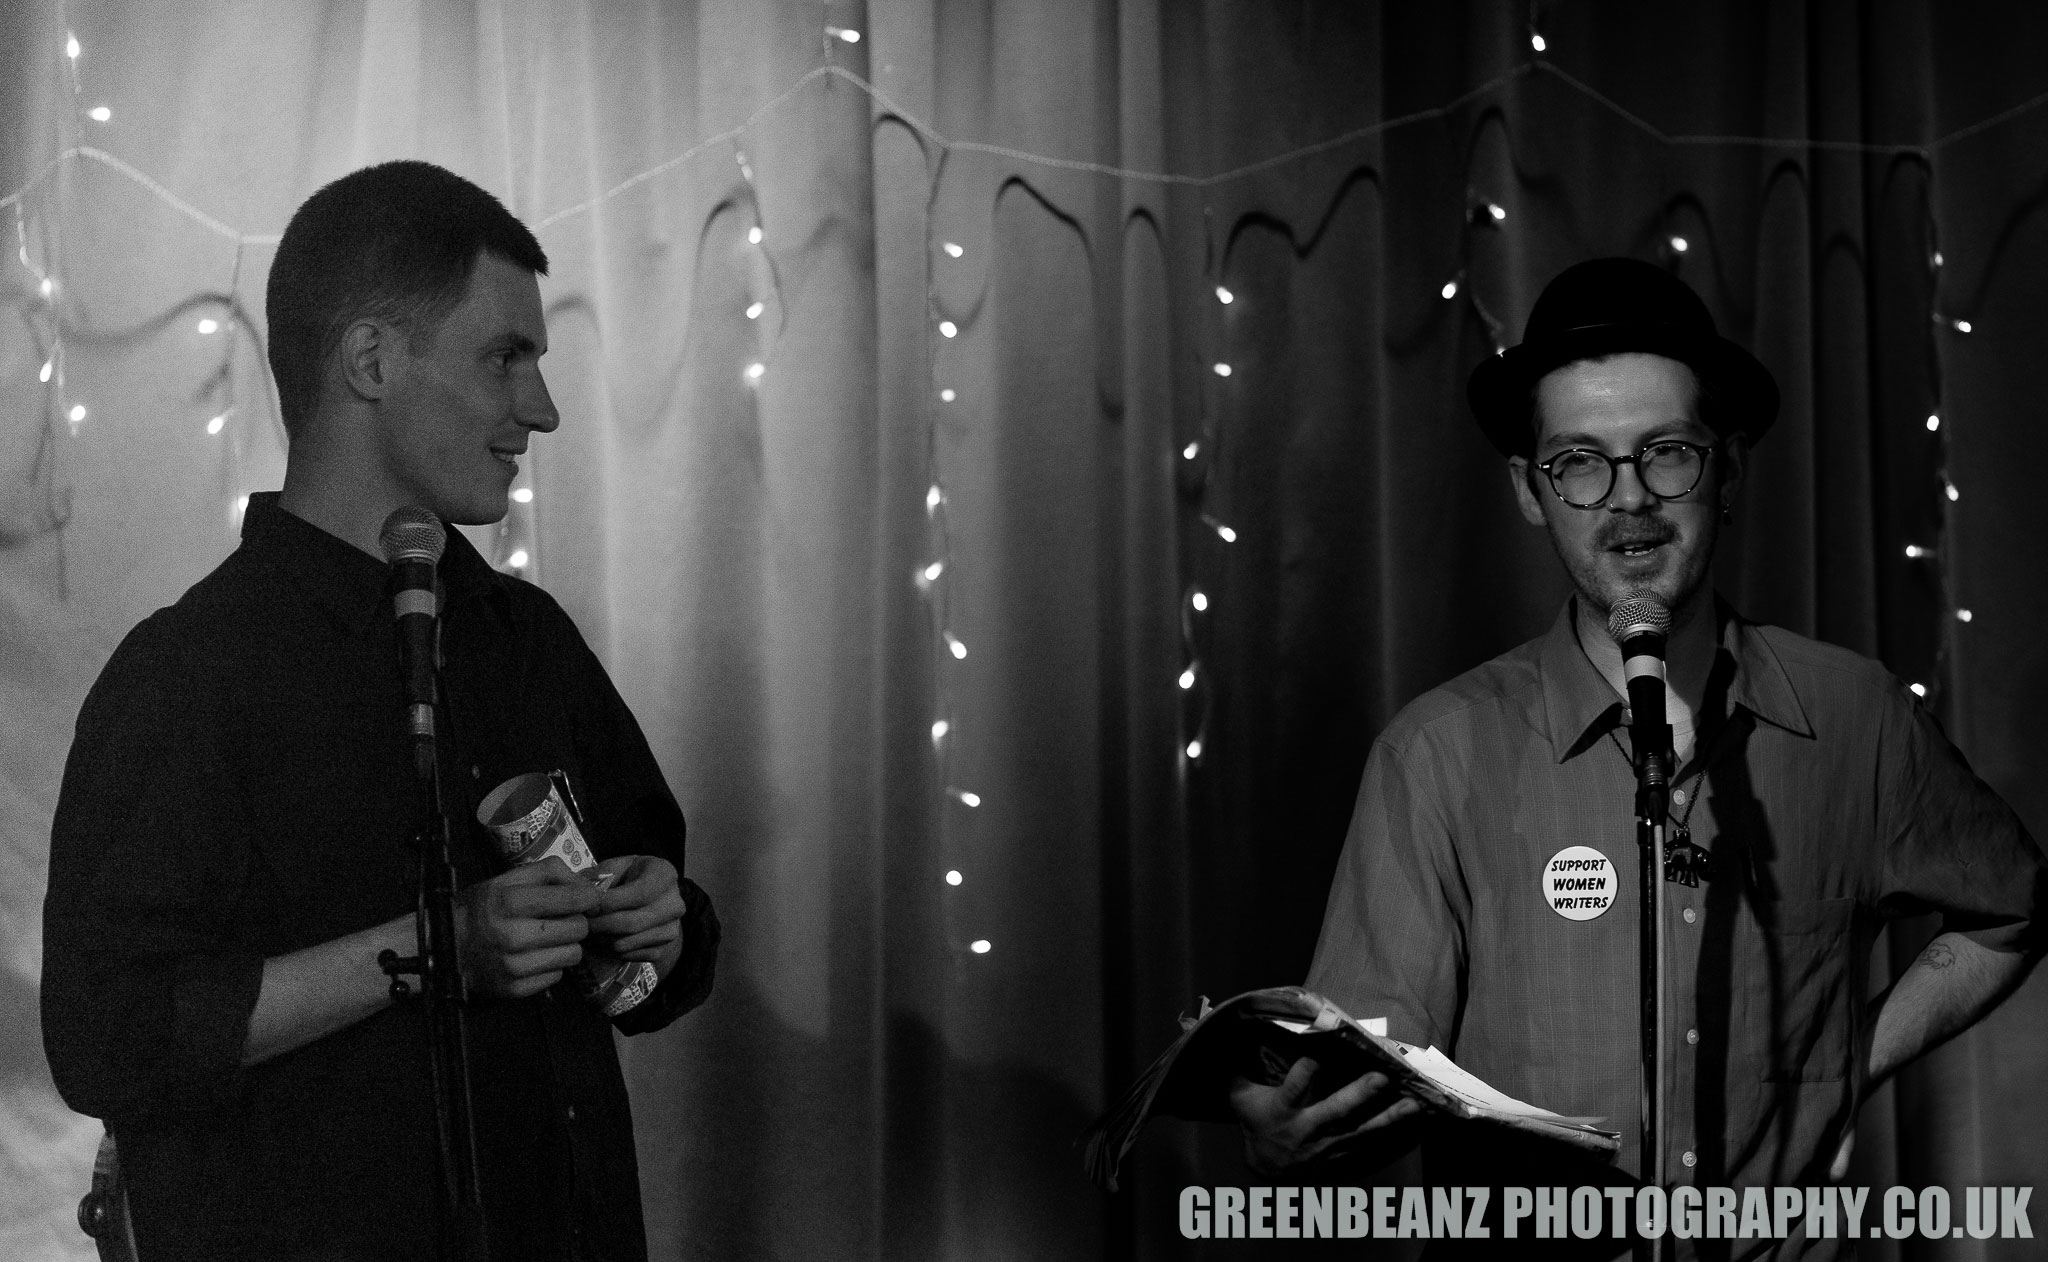 Chris White (left) and T.S.Idiot (right) perform at 'Forked' in Plymouth